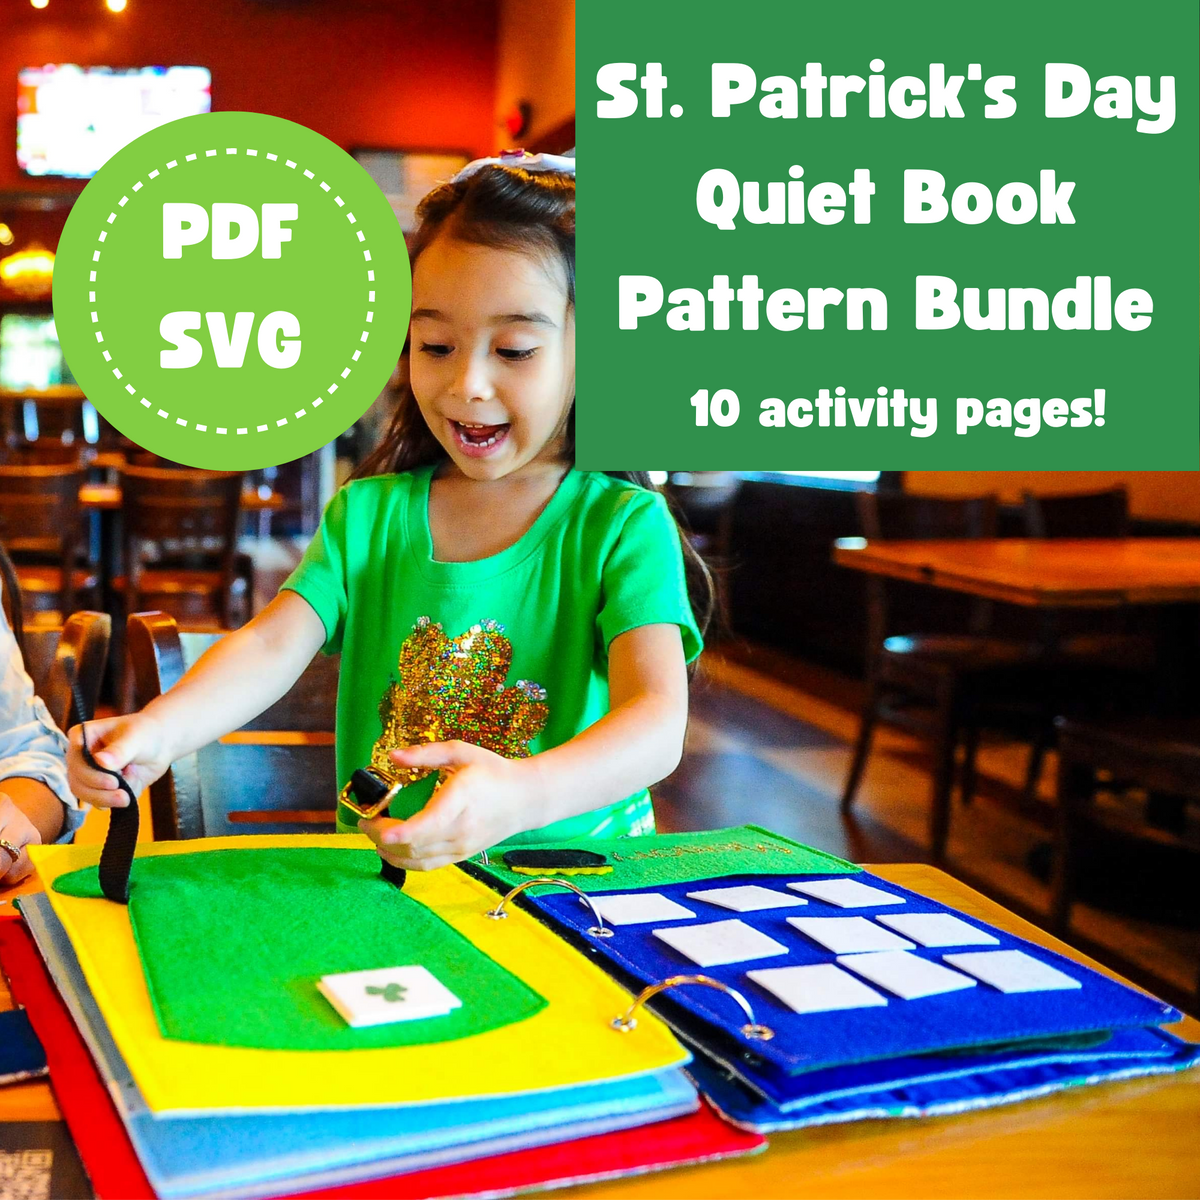 St. Patrick's Day Quiet Book Template and Instructions Bundle